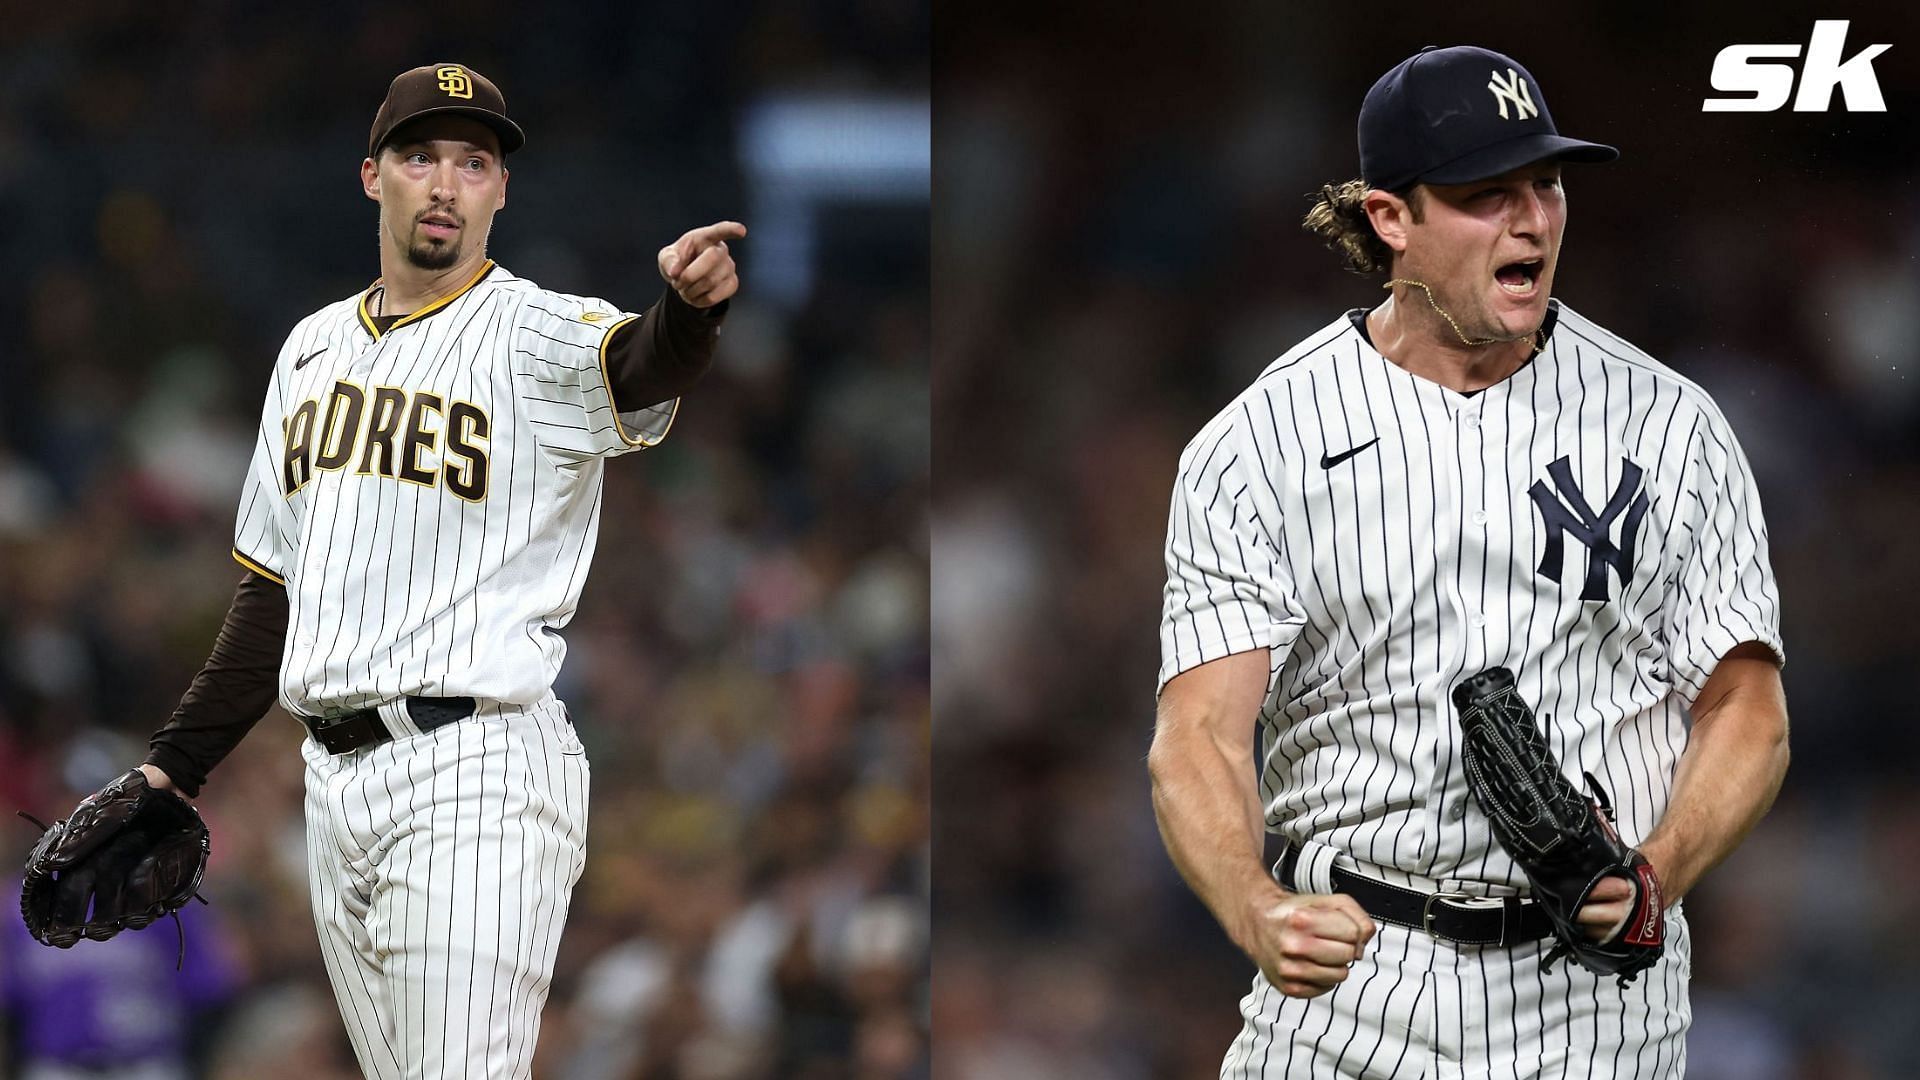 MLB insider Andy Martino does not believe that a potential Gerrit Cole injury will not force the Yankees to sign Blake Snell